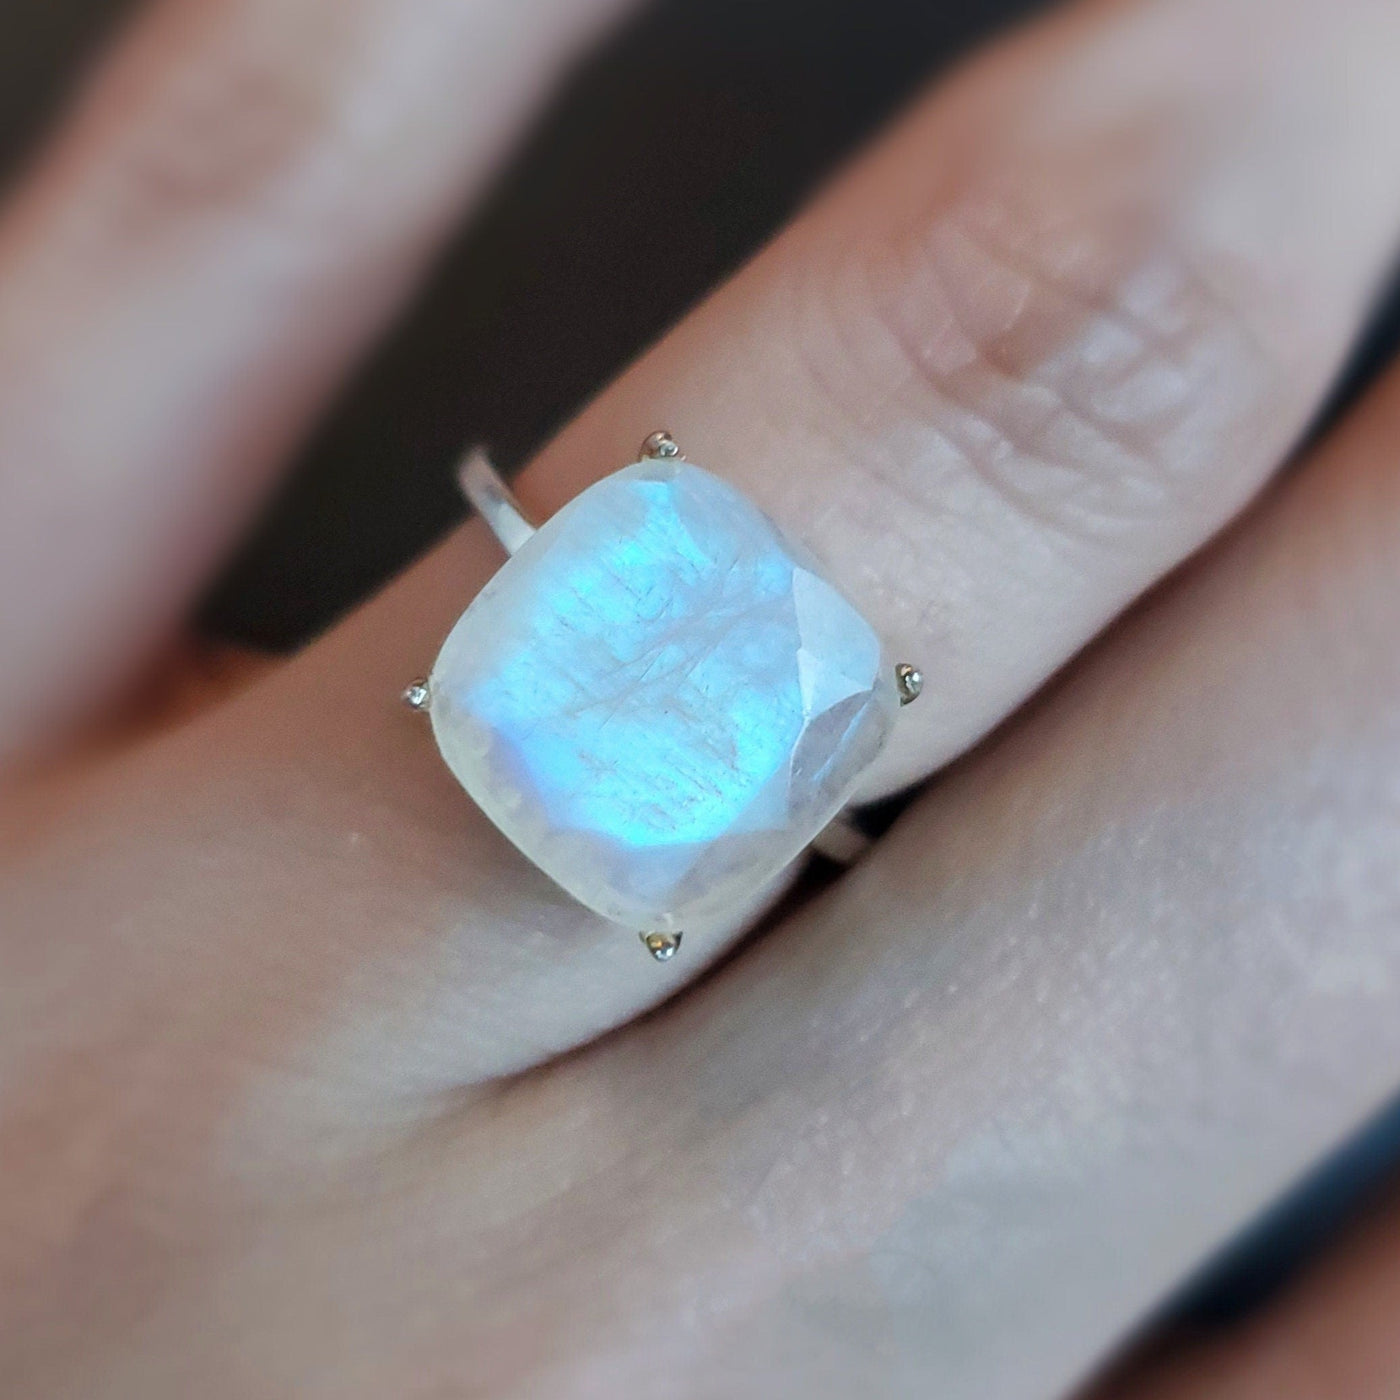 anxiety moonstone ring, anxiety ring, blue moonstone ring, antique moonstone ring, rainbow moonstone engagement ring, moonstone ring women, mens moonstone ring, boho moonstone ring, moonstone diamond ring, 